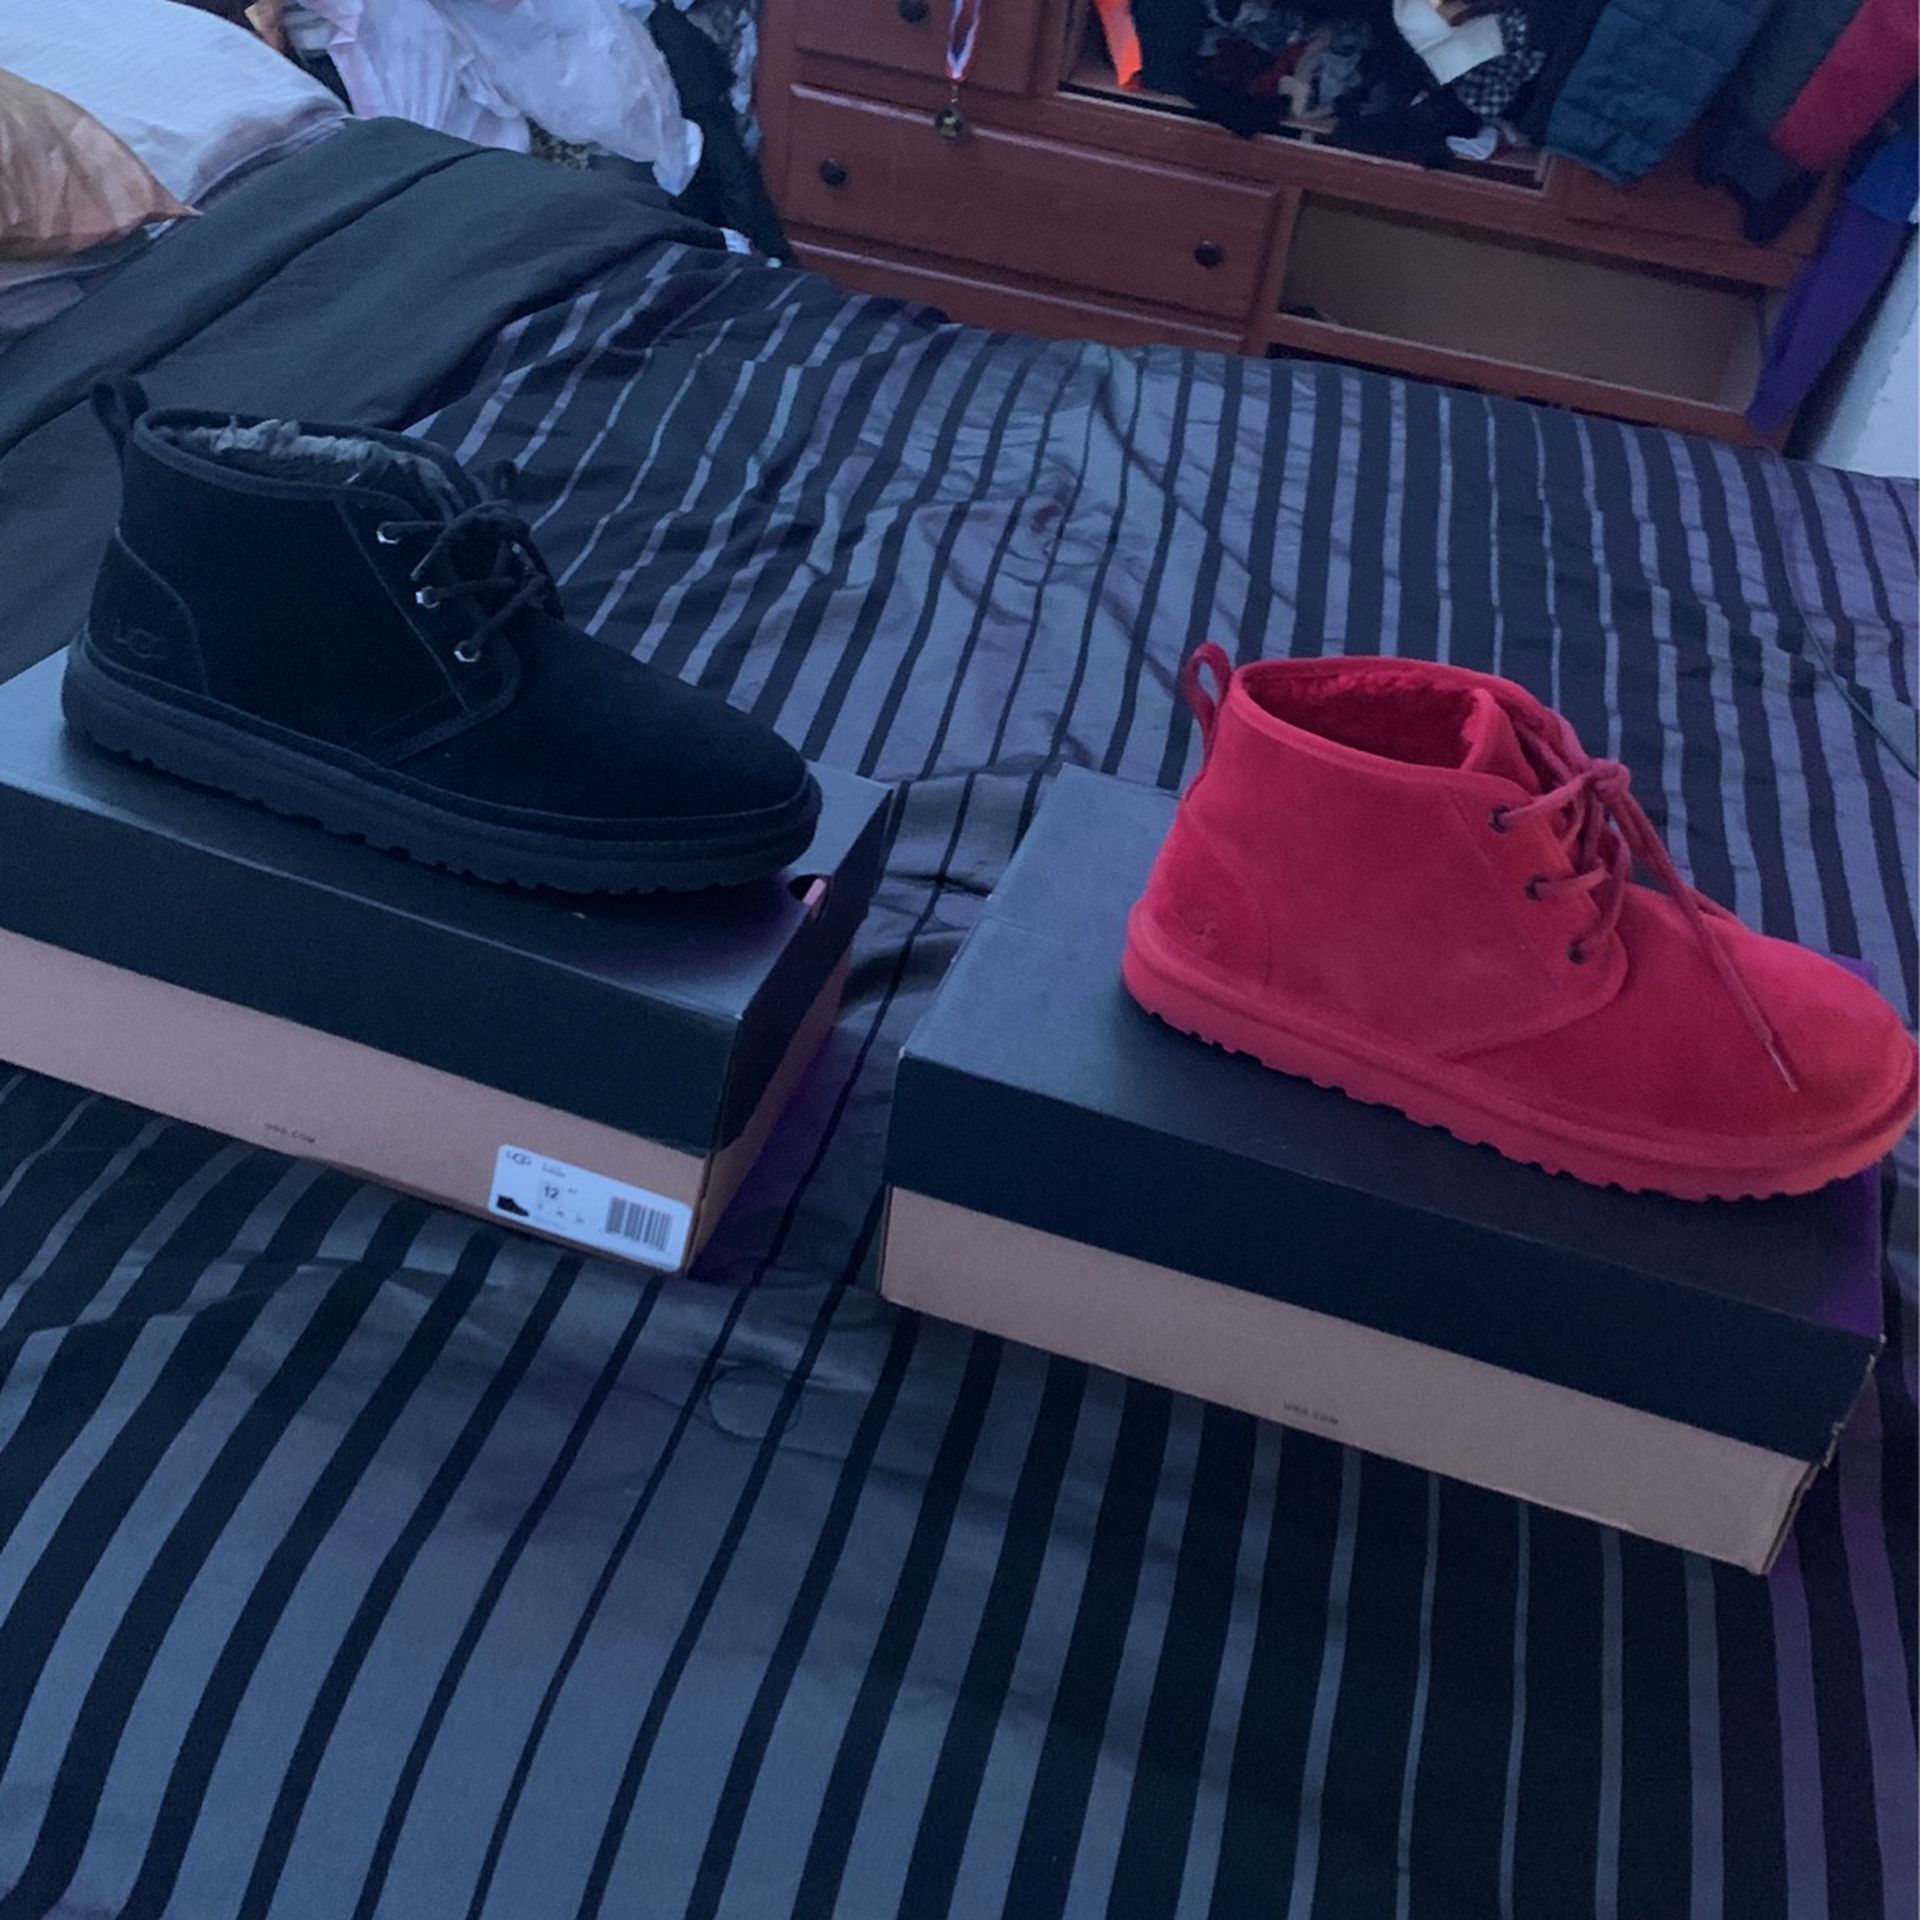 Red And Black Uggs Both For 200 OBO 